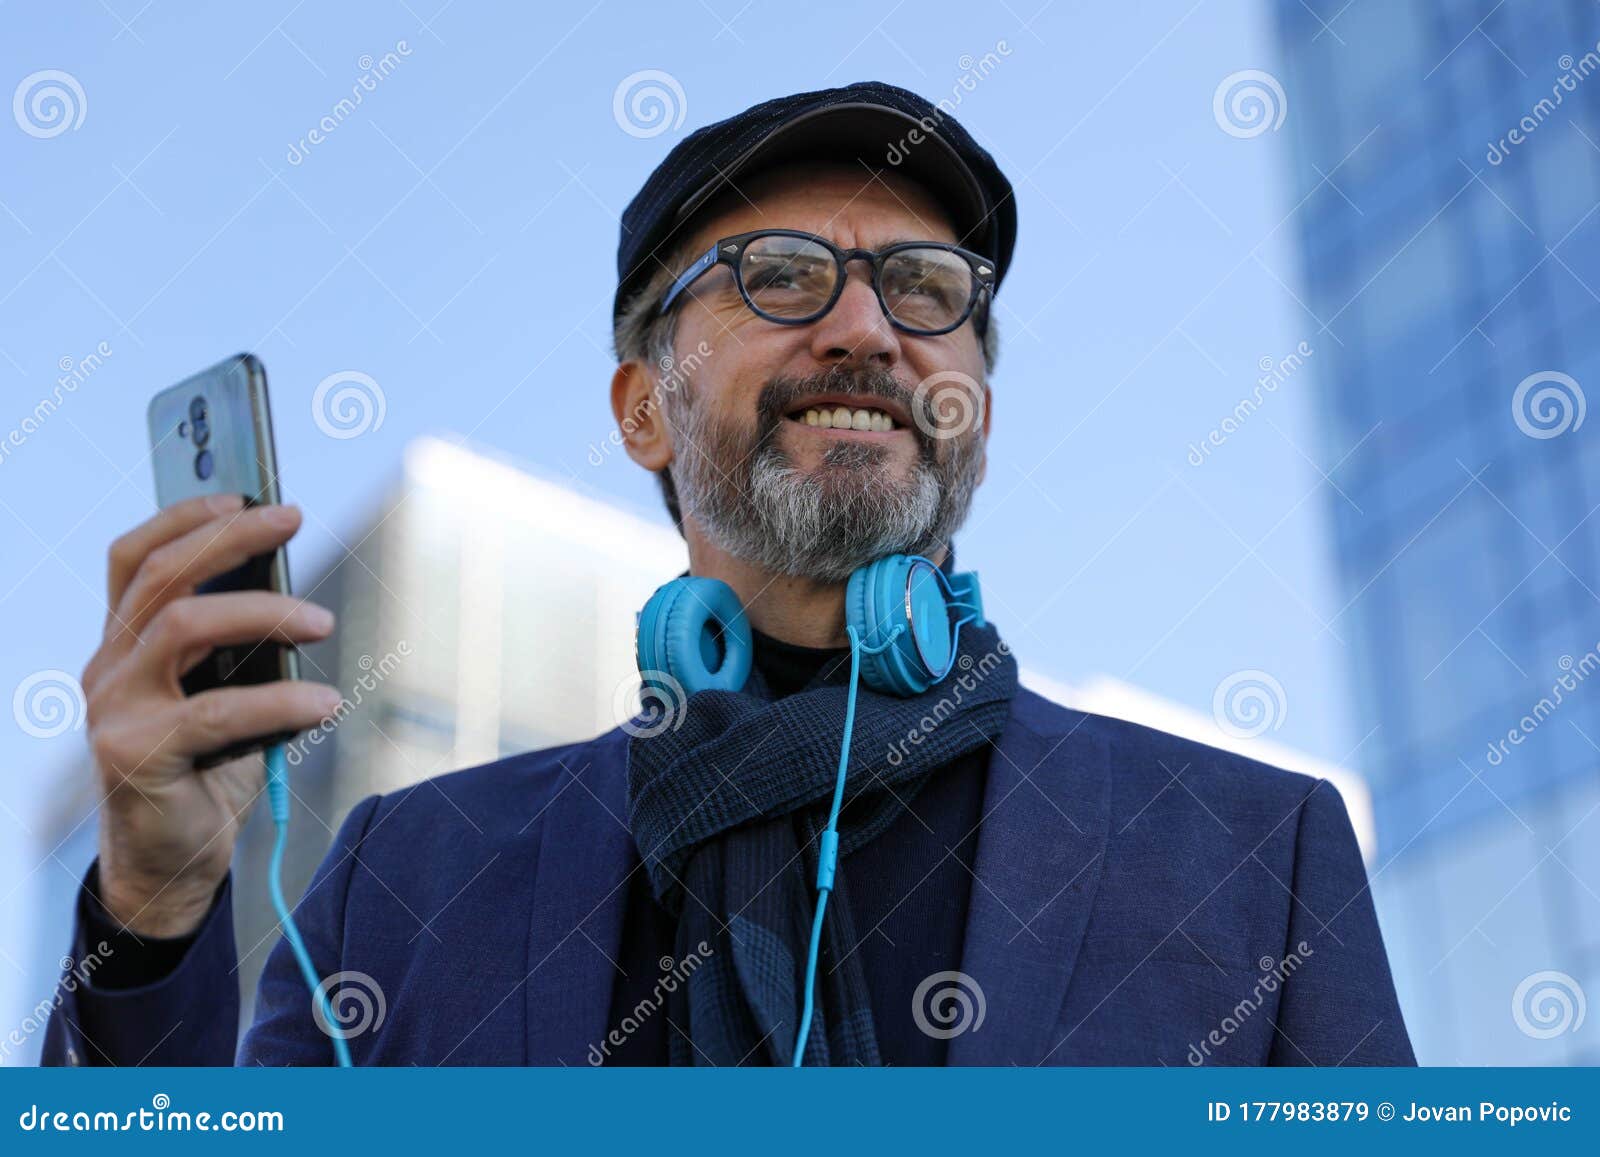 9. Professor with Blue Hair - Dreamstime - wide 1